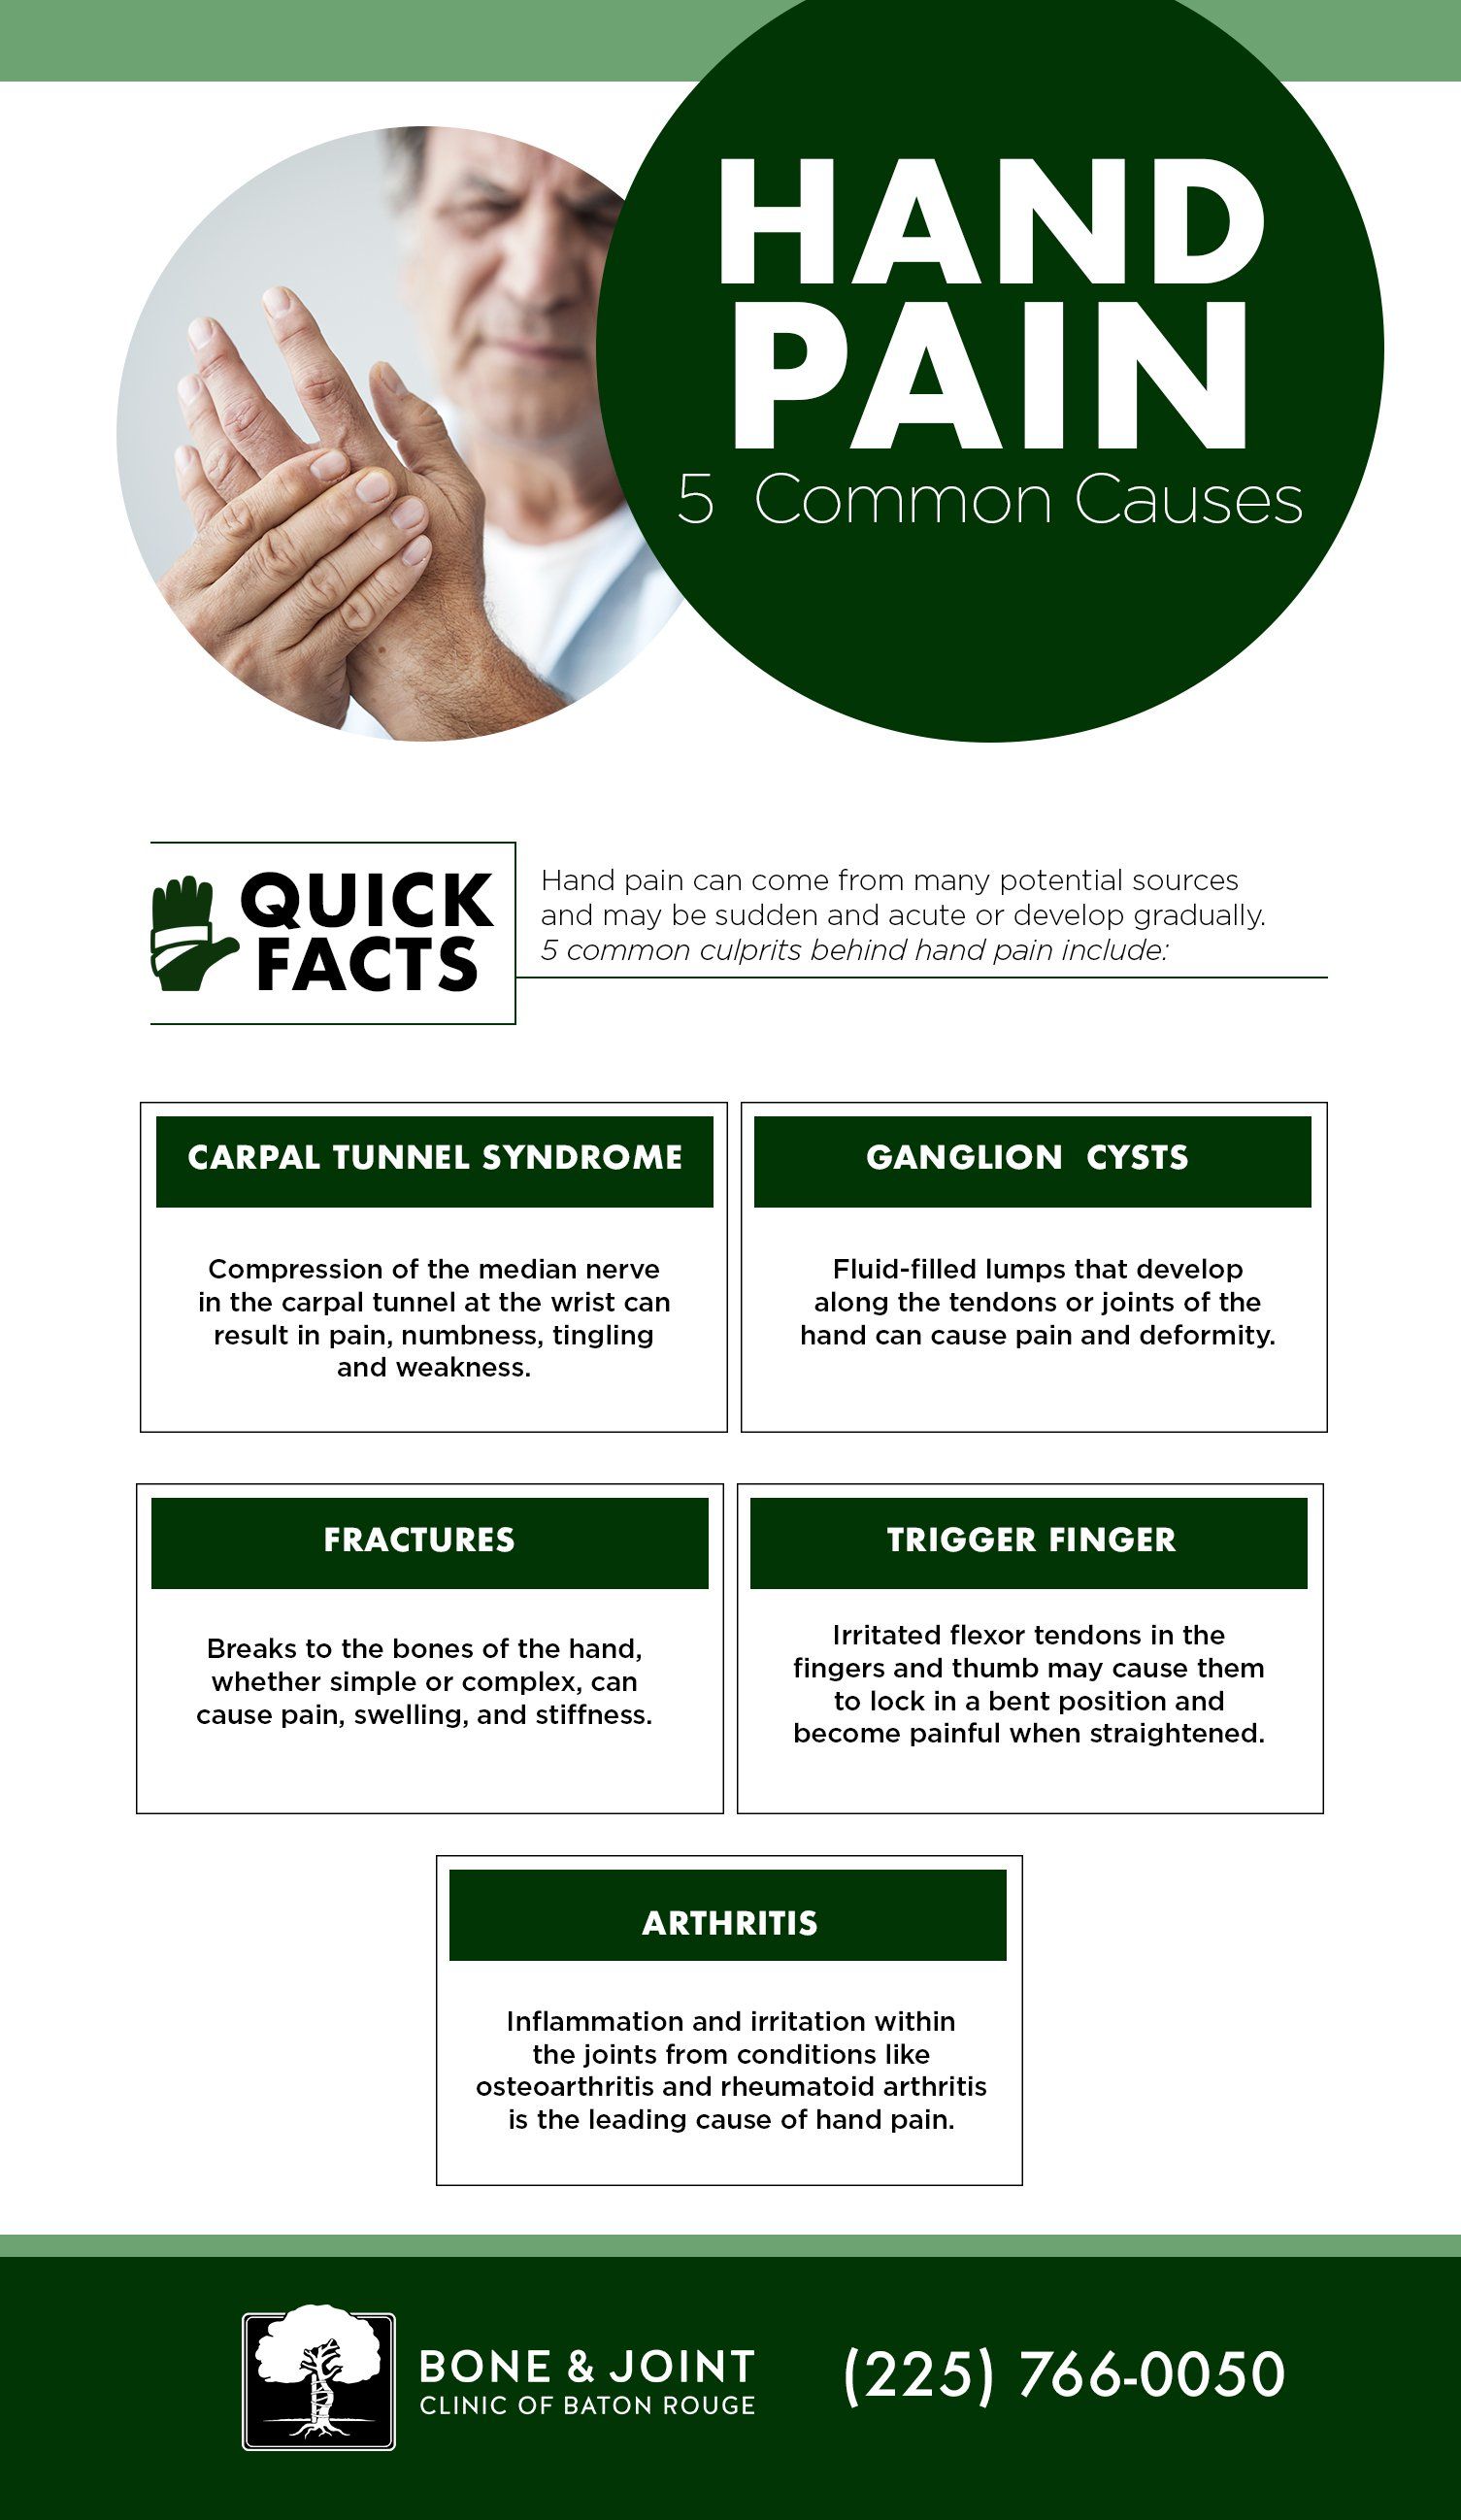 hand pain infographic 5 common causes